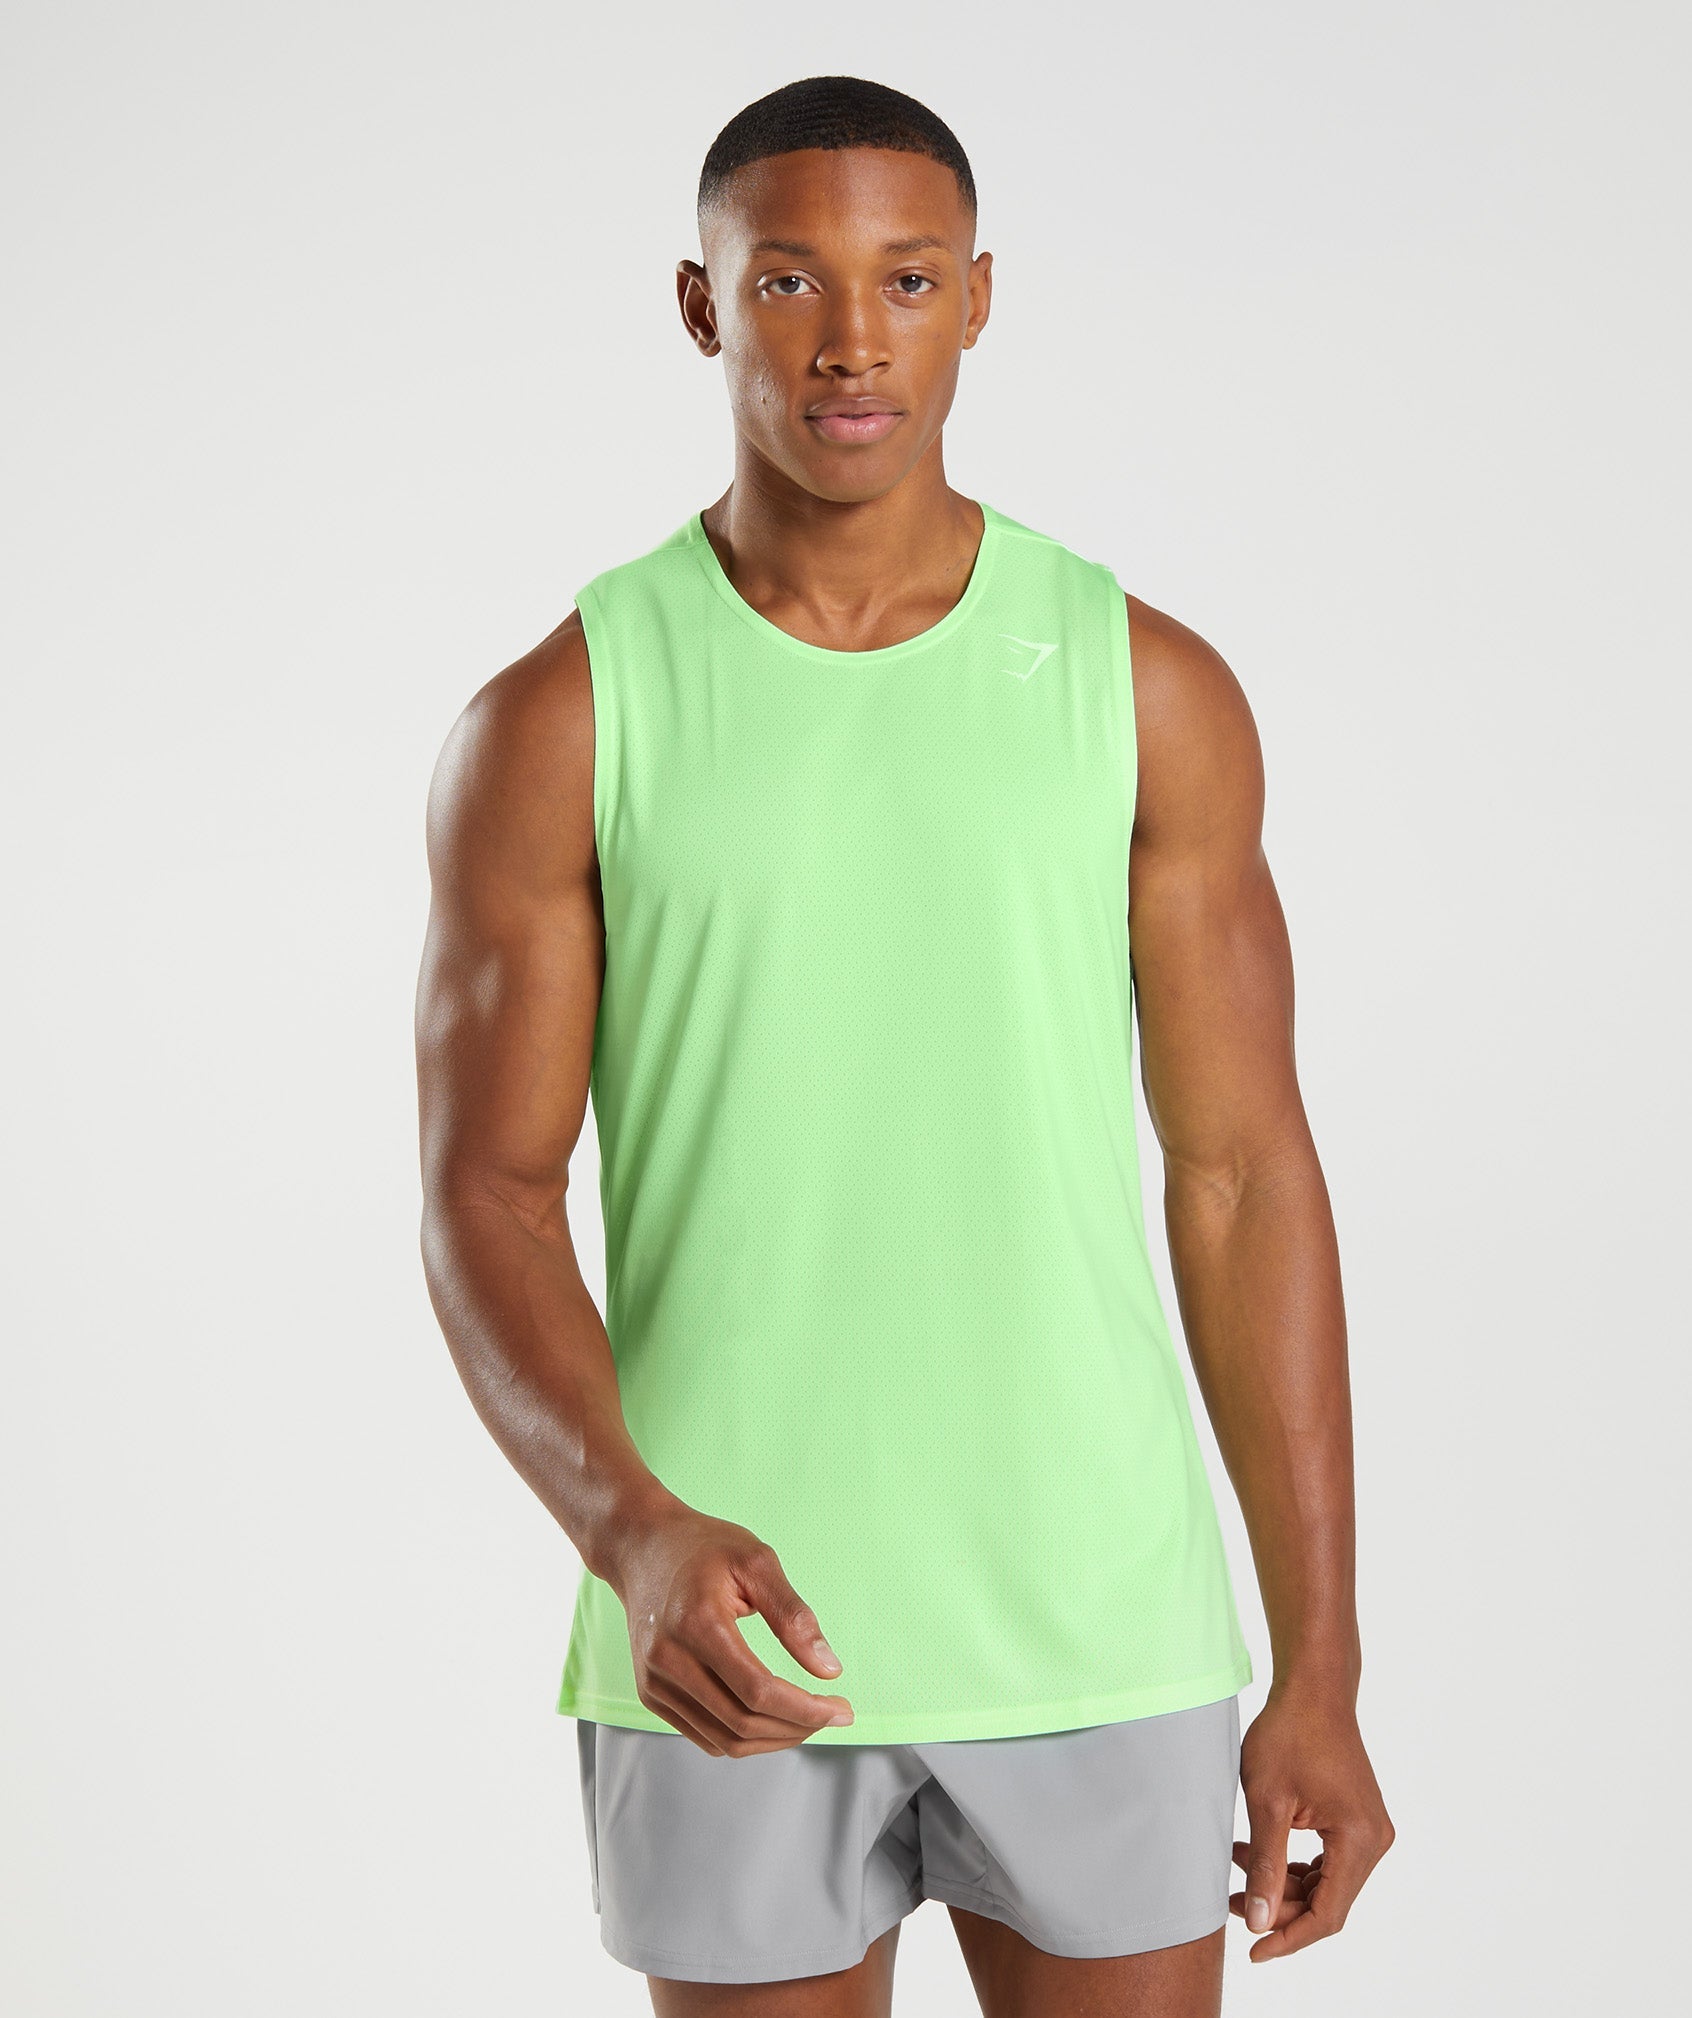 Arrival Tank in Fluo Mint - view 1